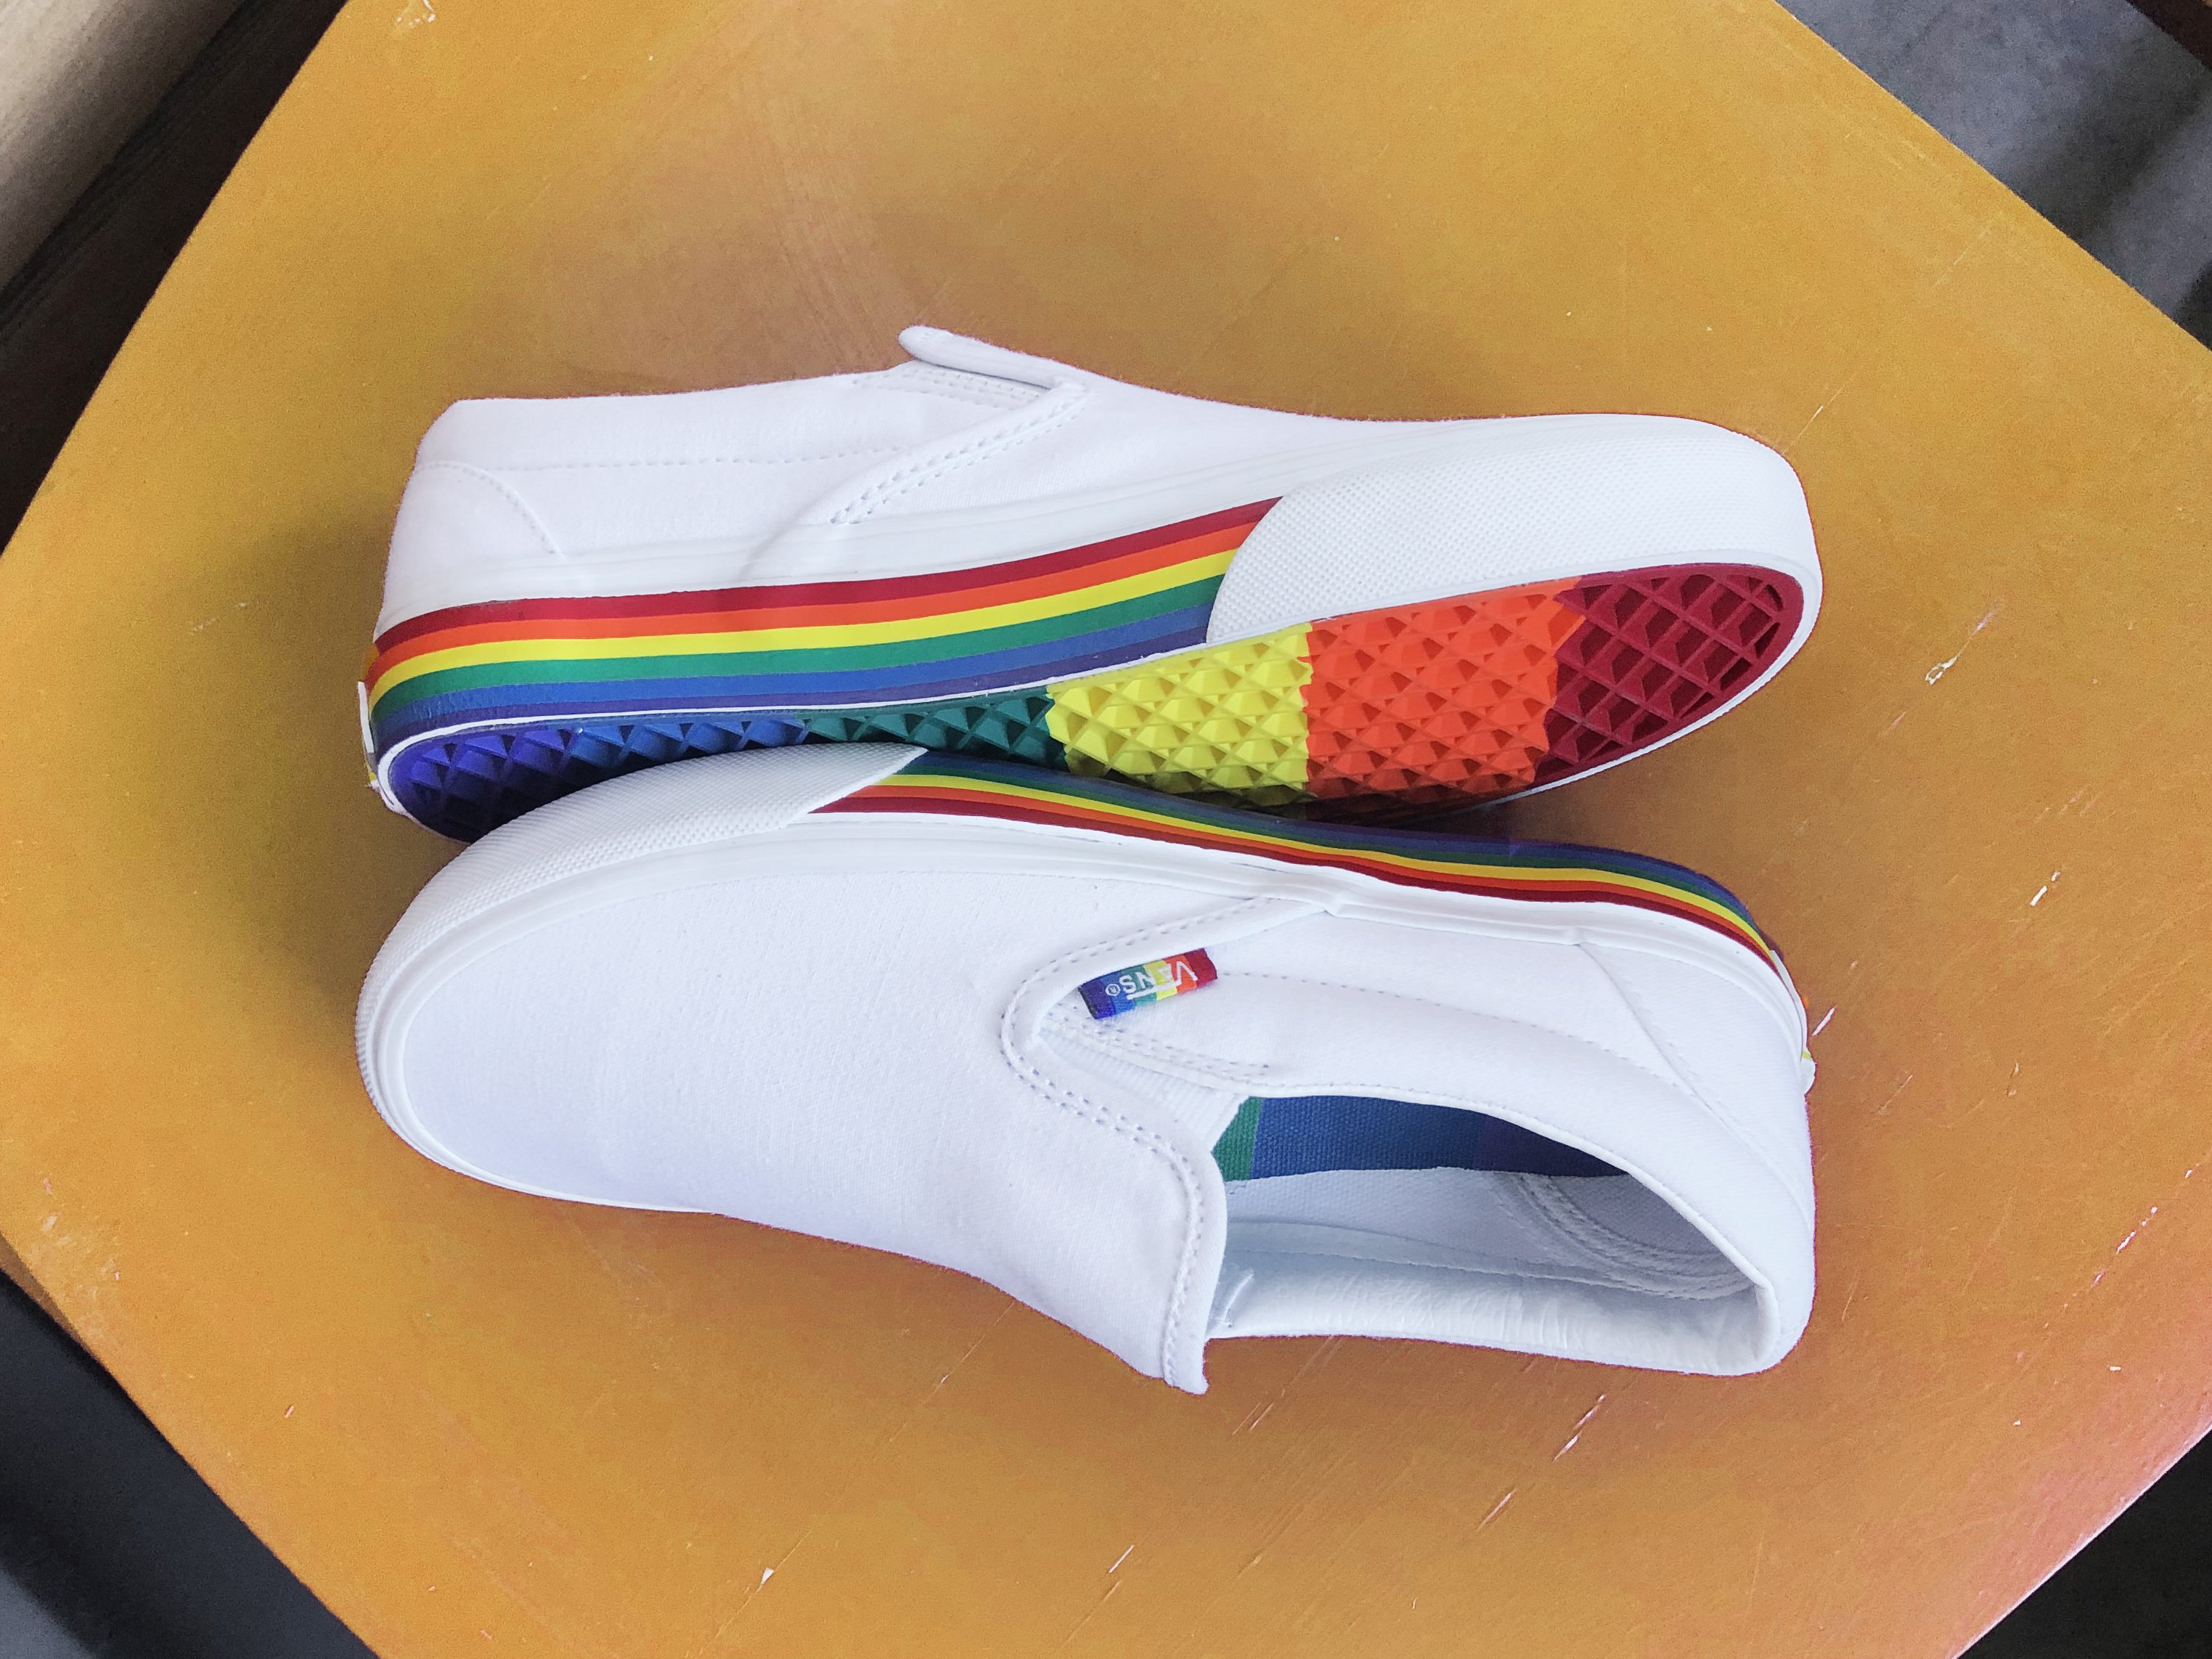 Cut off Darts Scold journeys on Twitter: "🌈🌈🌈 vans rainbow slip on, available only at  journeys 😍😍😍 https://t.co/Ye9vW3Ywxo https://t.co/MbD3nDiR6n" / Twitter